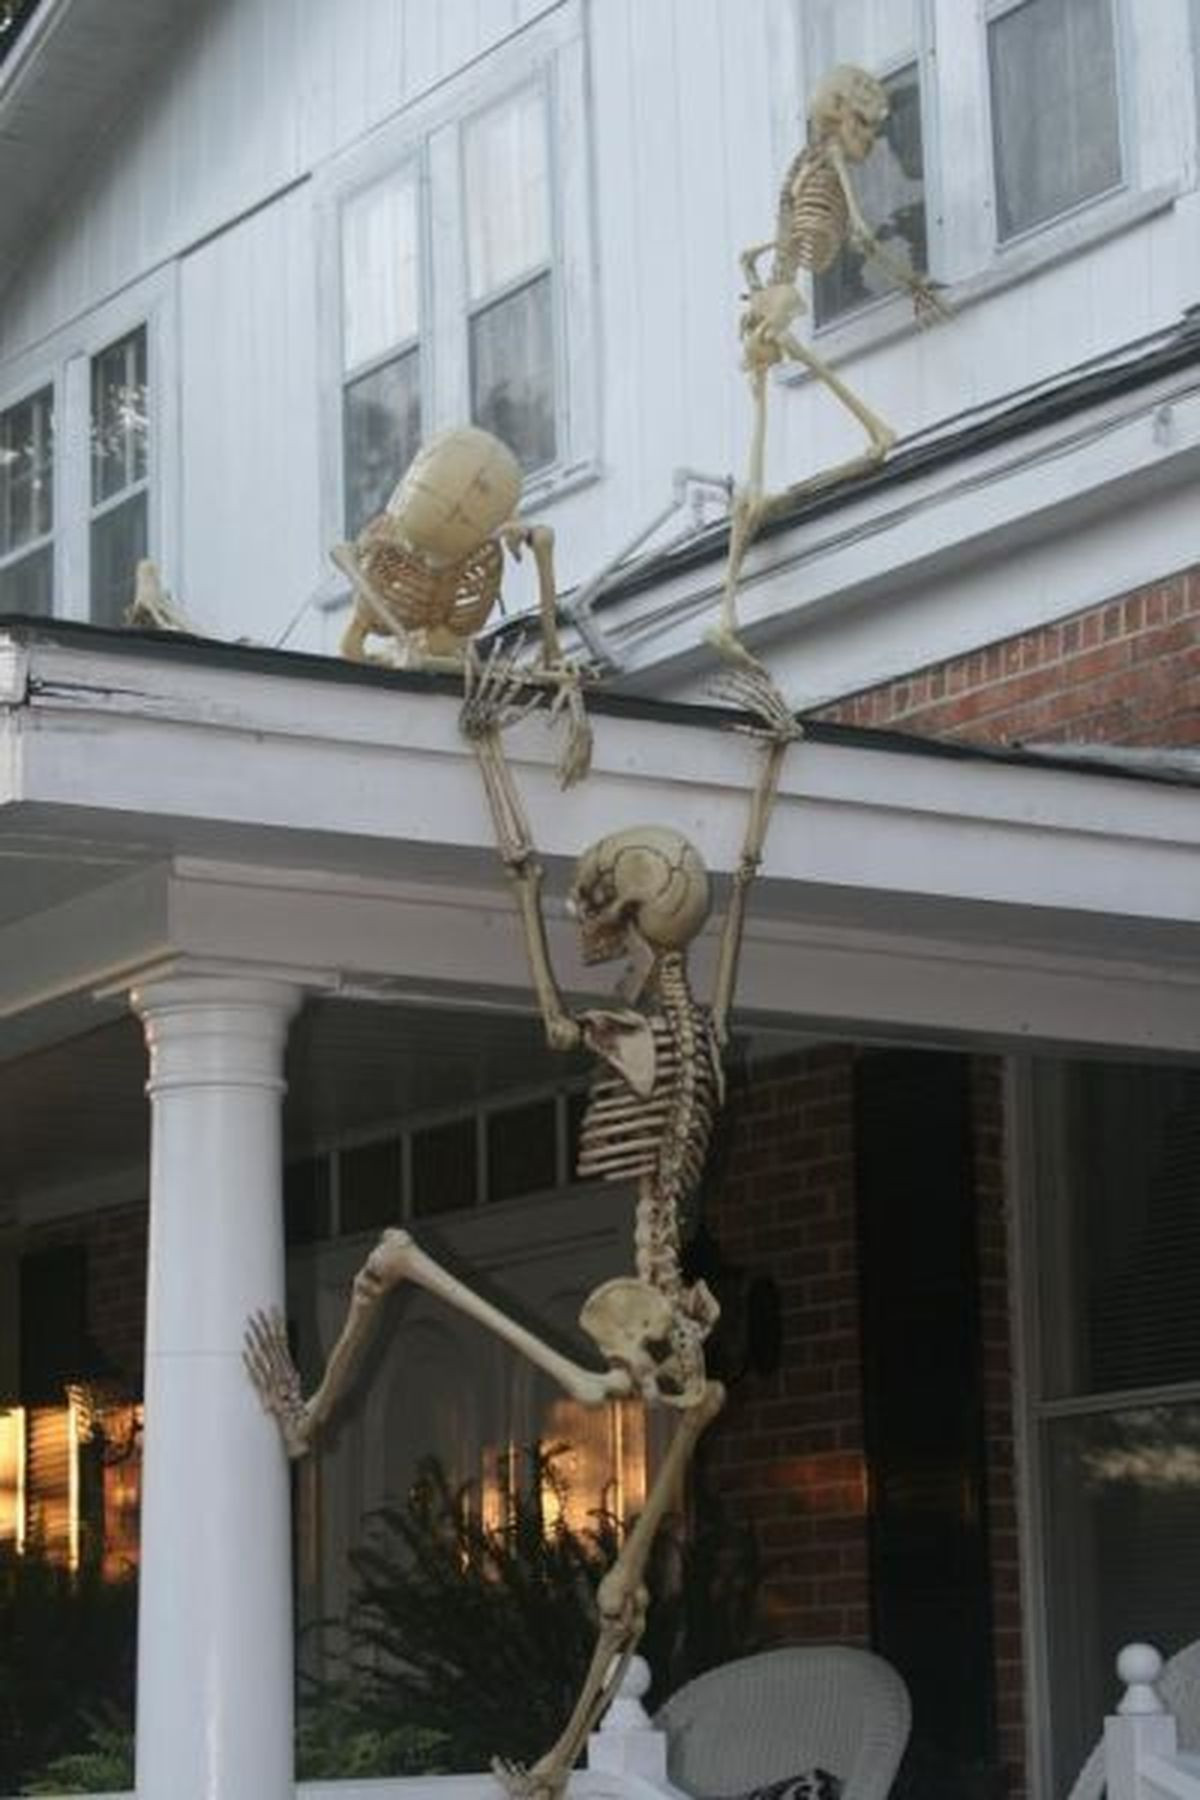 Halloween Outdoor Decorating Ideas
 plete List of Halloween Decorations Ideas In Your Home